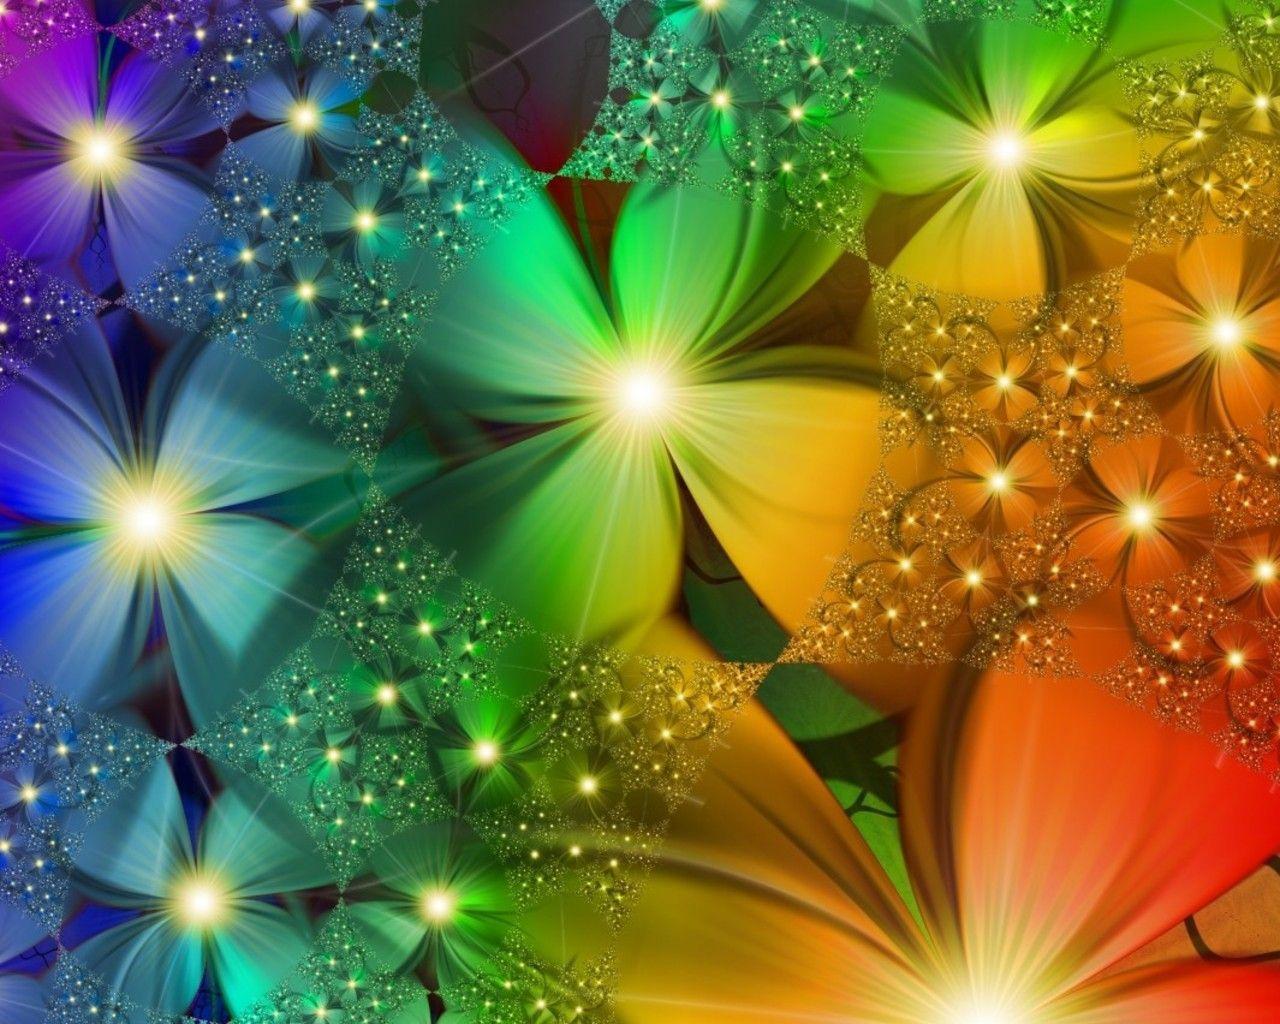 Colorful 3D Wallpaper Free 7149 HD Picture. Best Wallpaper Photo